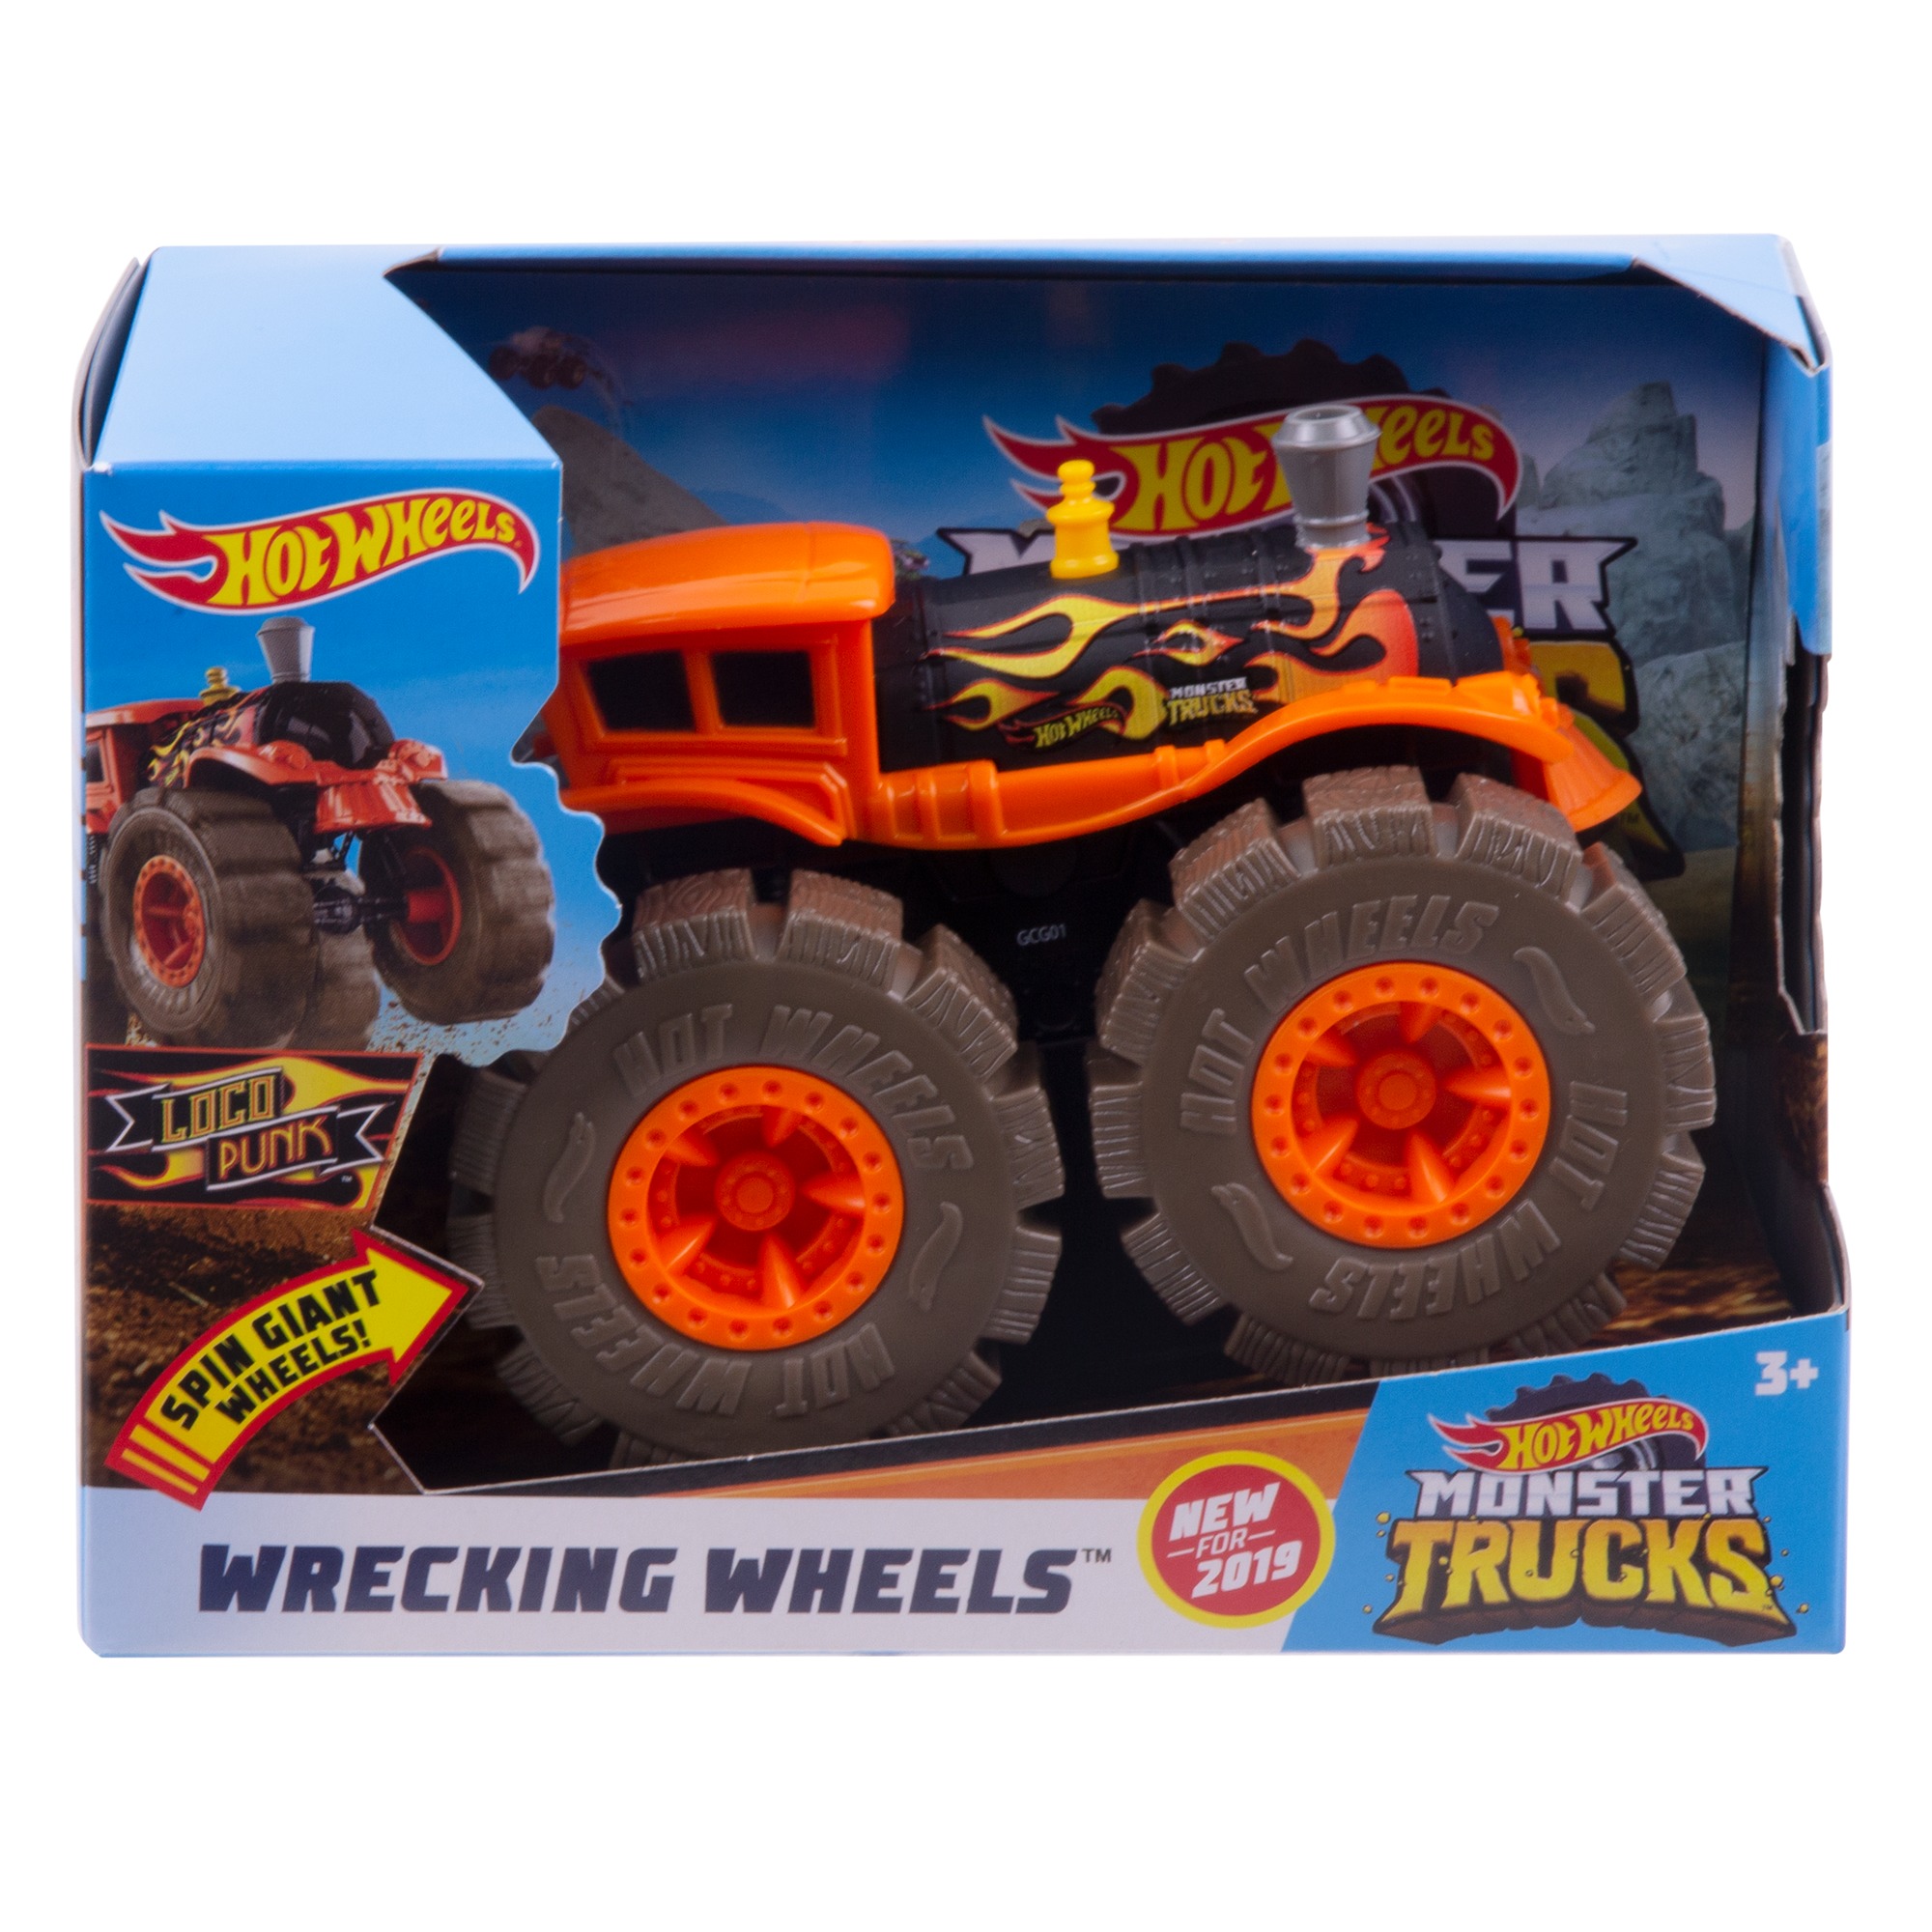 Monster Trucks By Hot Wheels 1:43 Scale Vehicle (Styles May Vary) - image 9 of 9